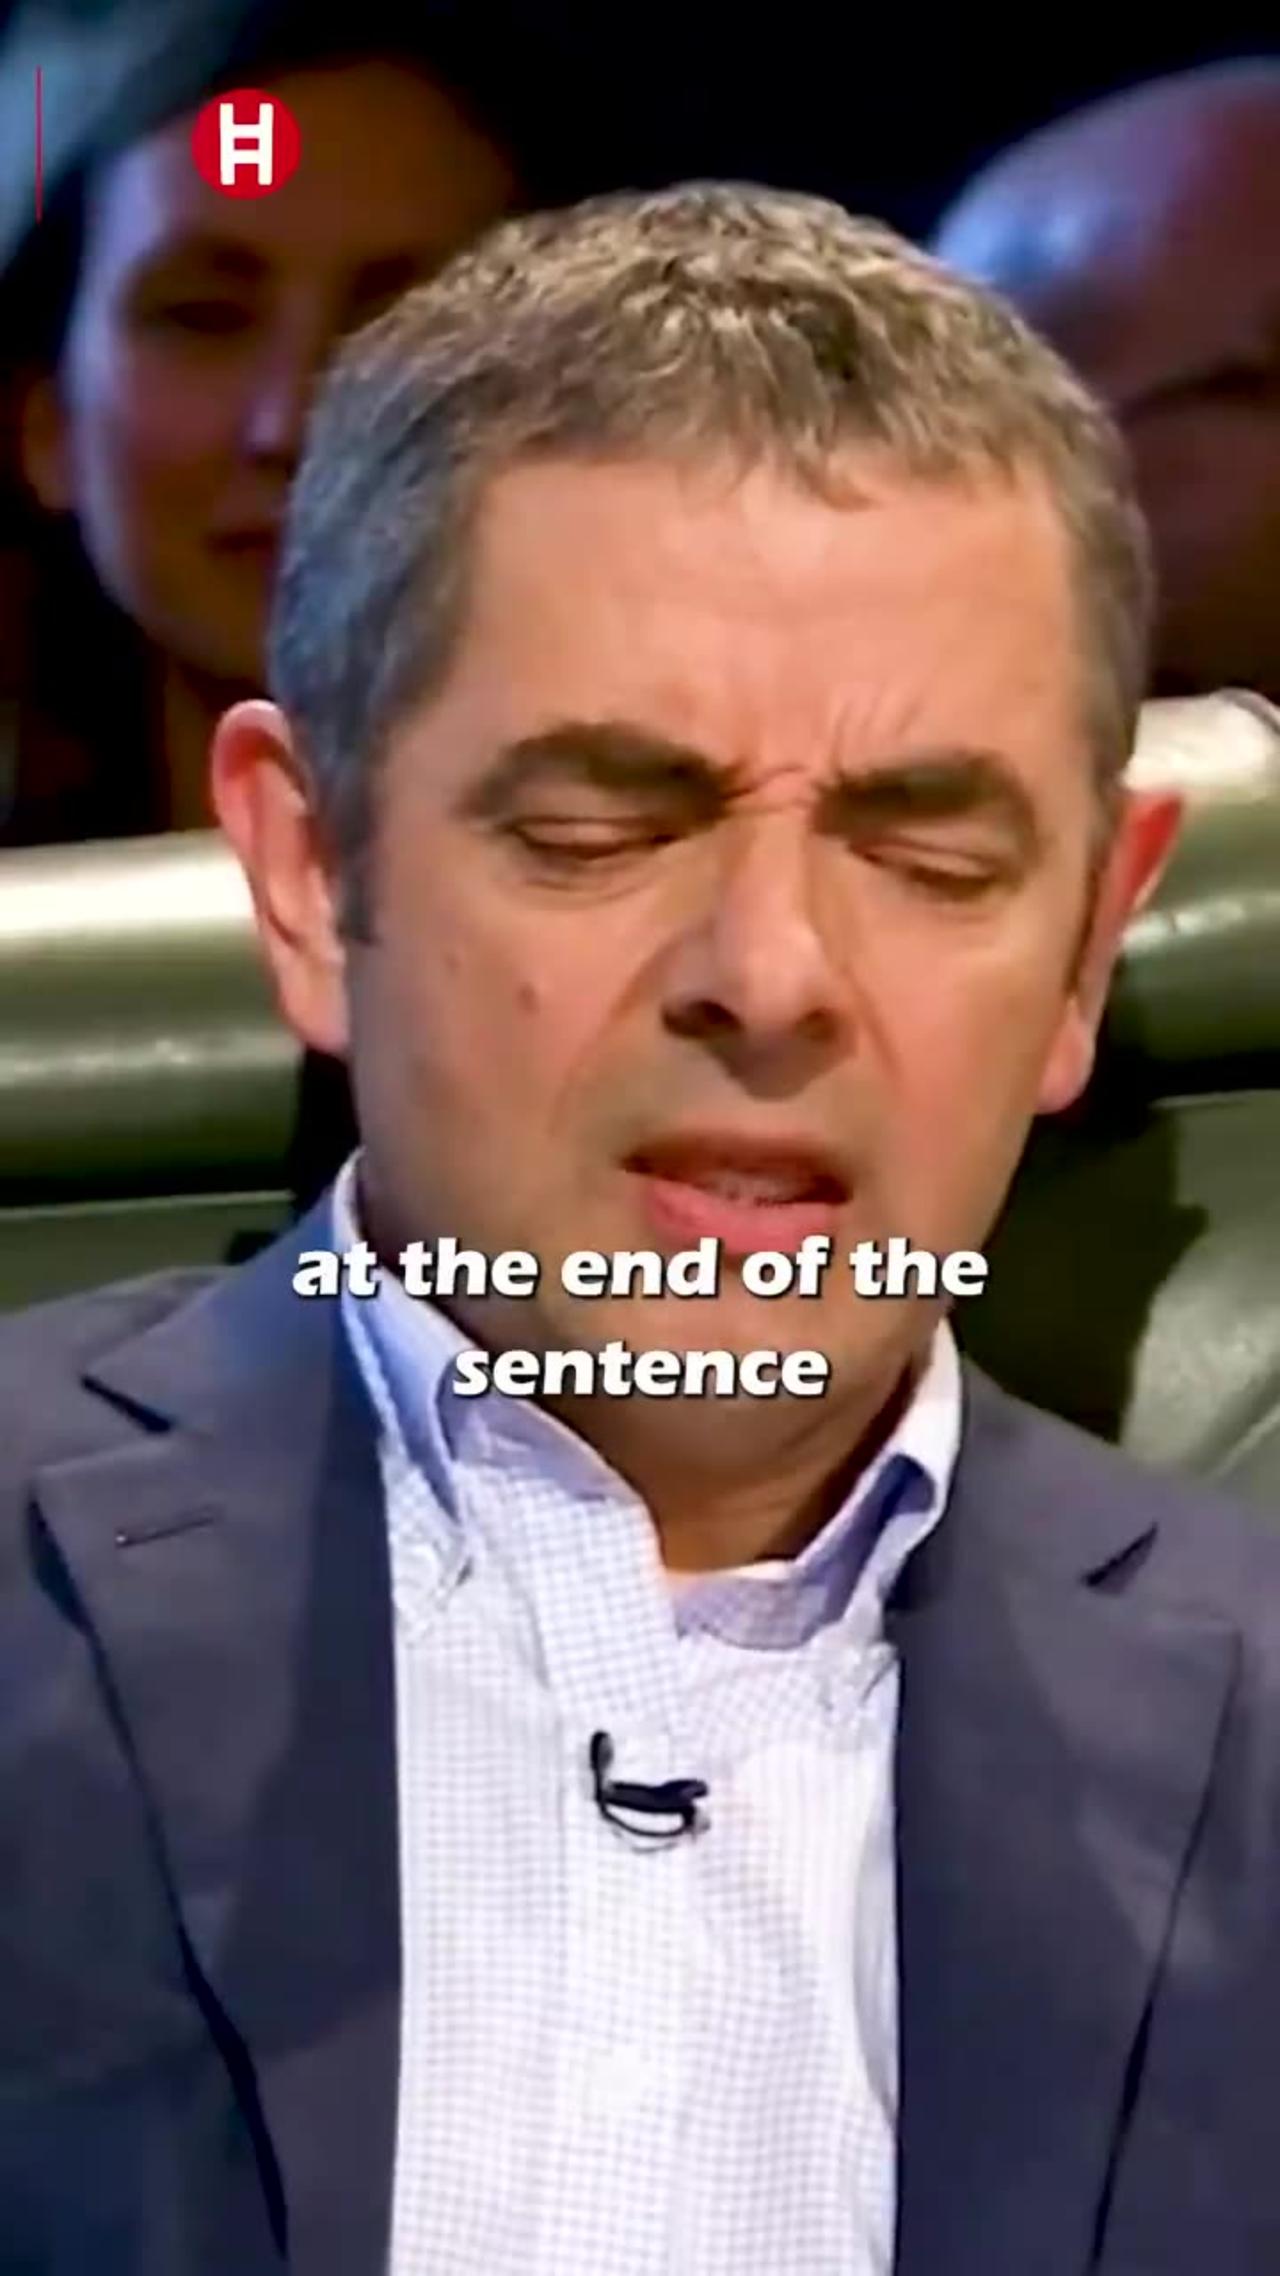 Rowan Atkinson's Hilarious Moments on BBC Two's Top Gear - Featuring Mr. Bean's Comedy Antics